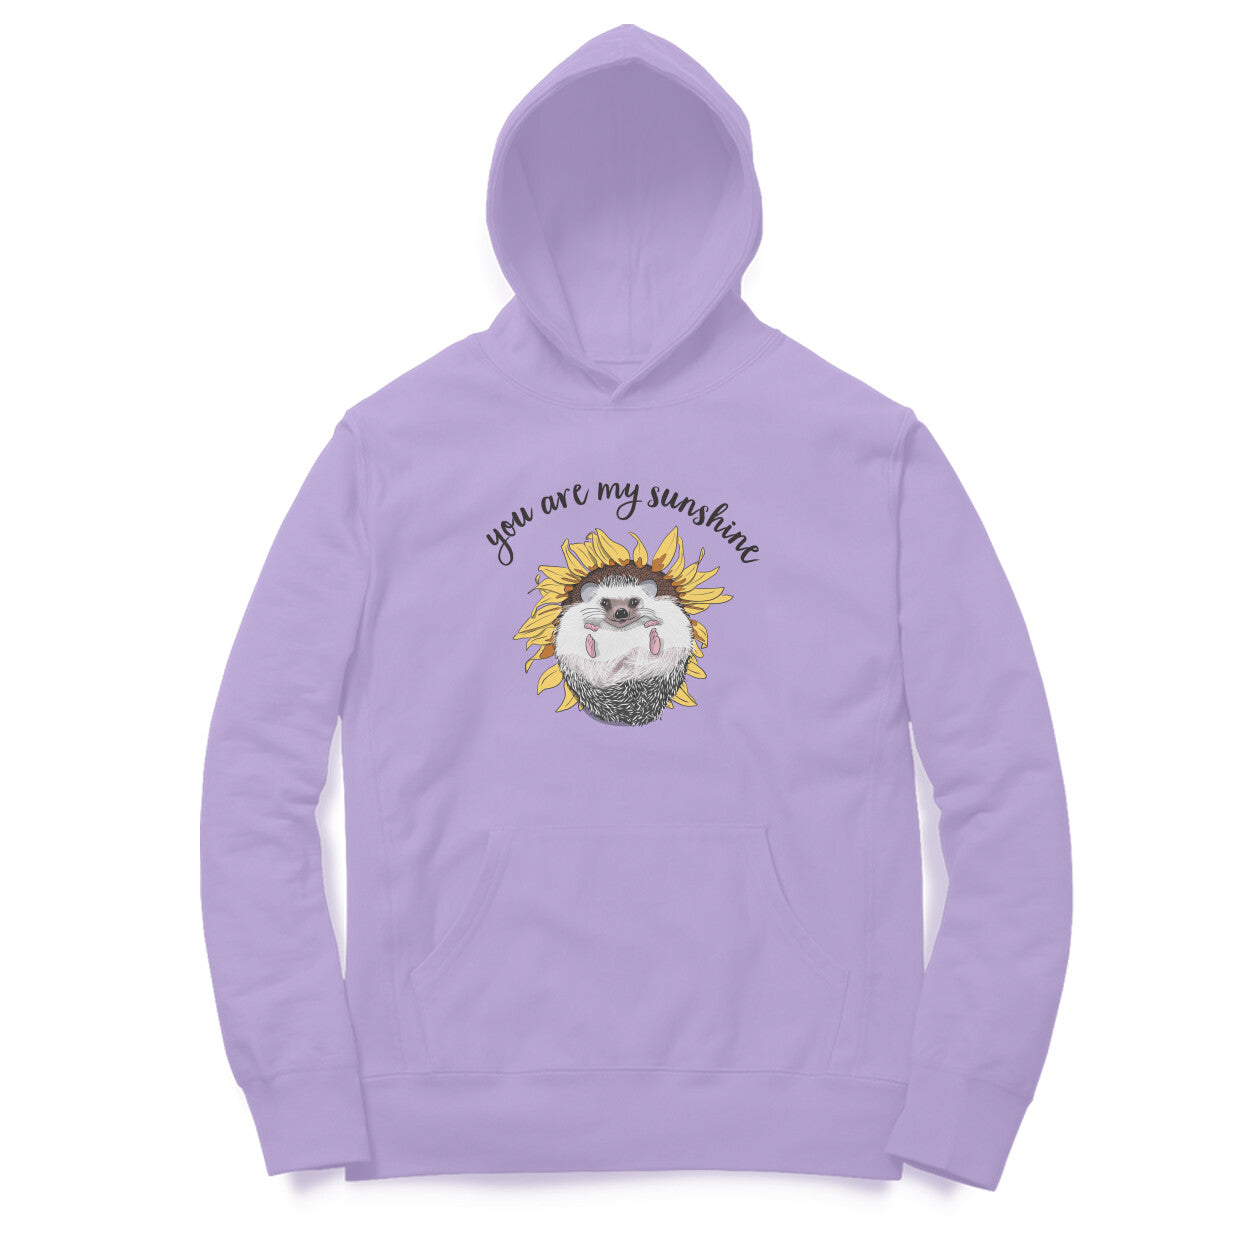 Hoodie (Men) - Sunny Side Up (6 Colours)